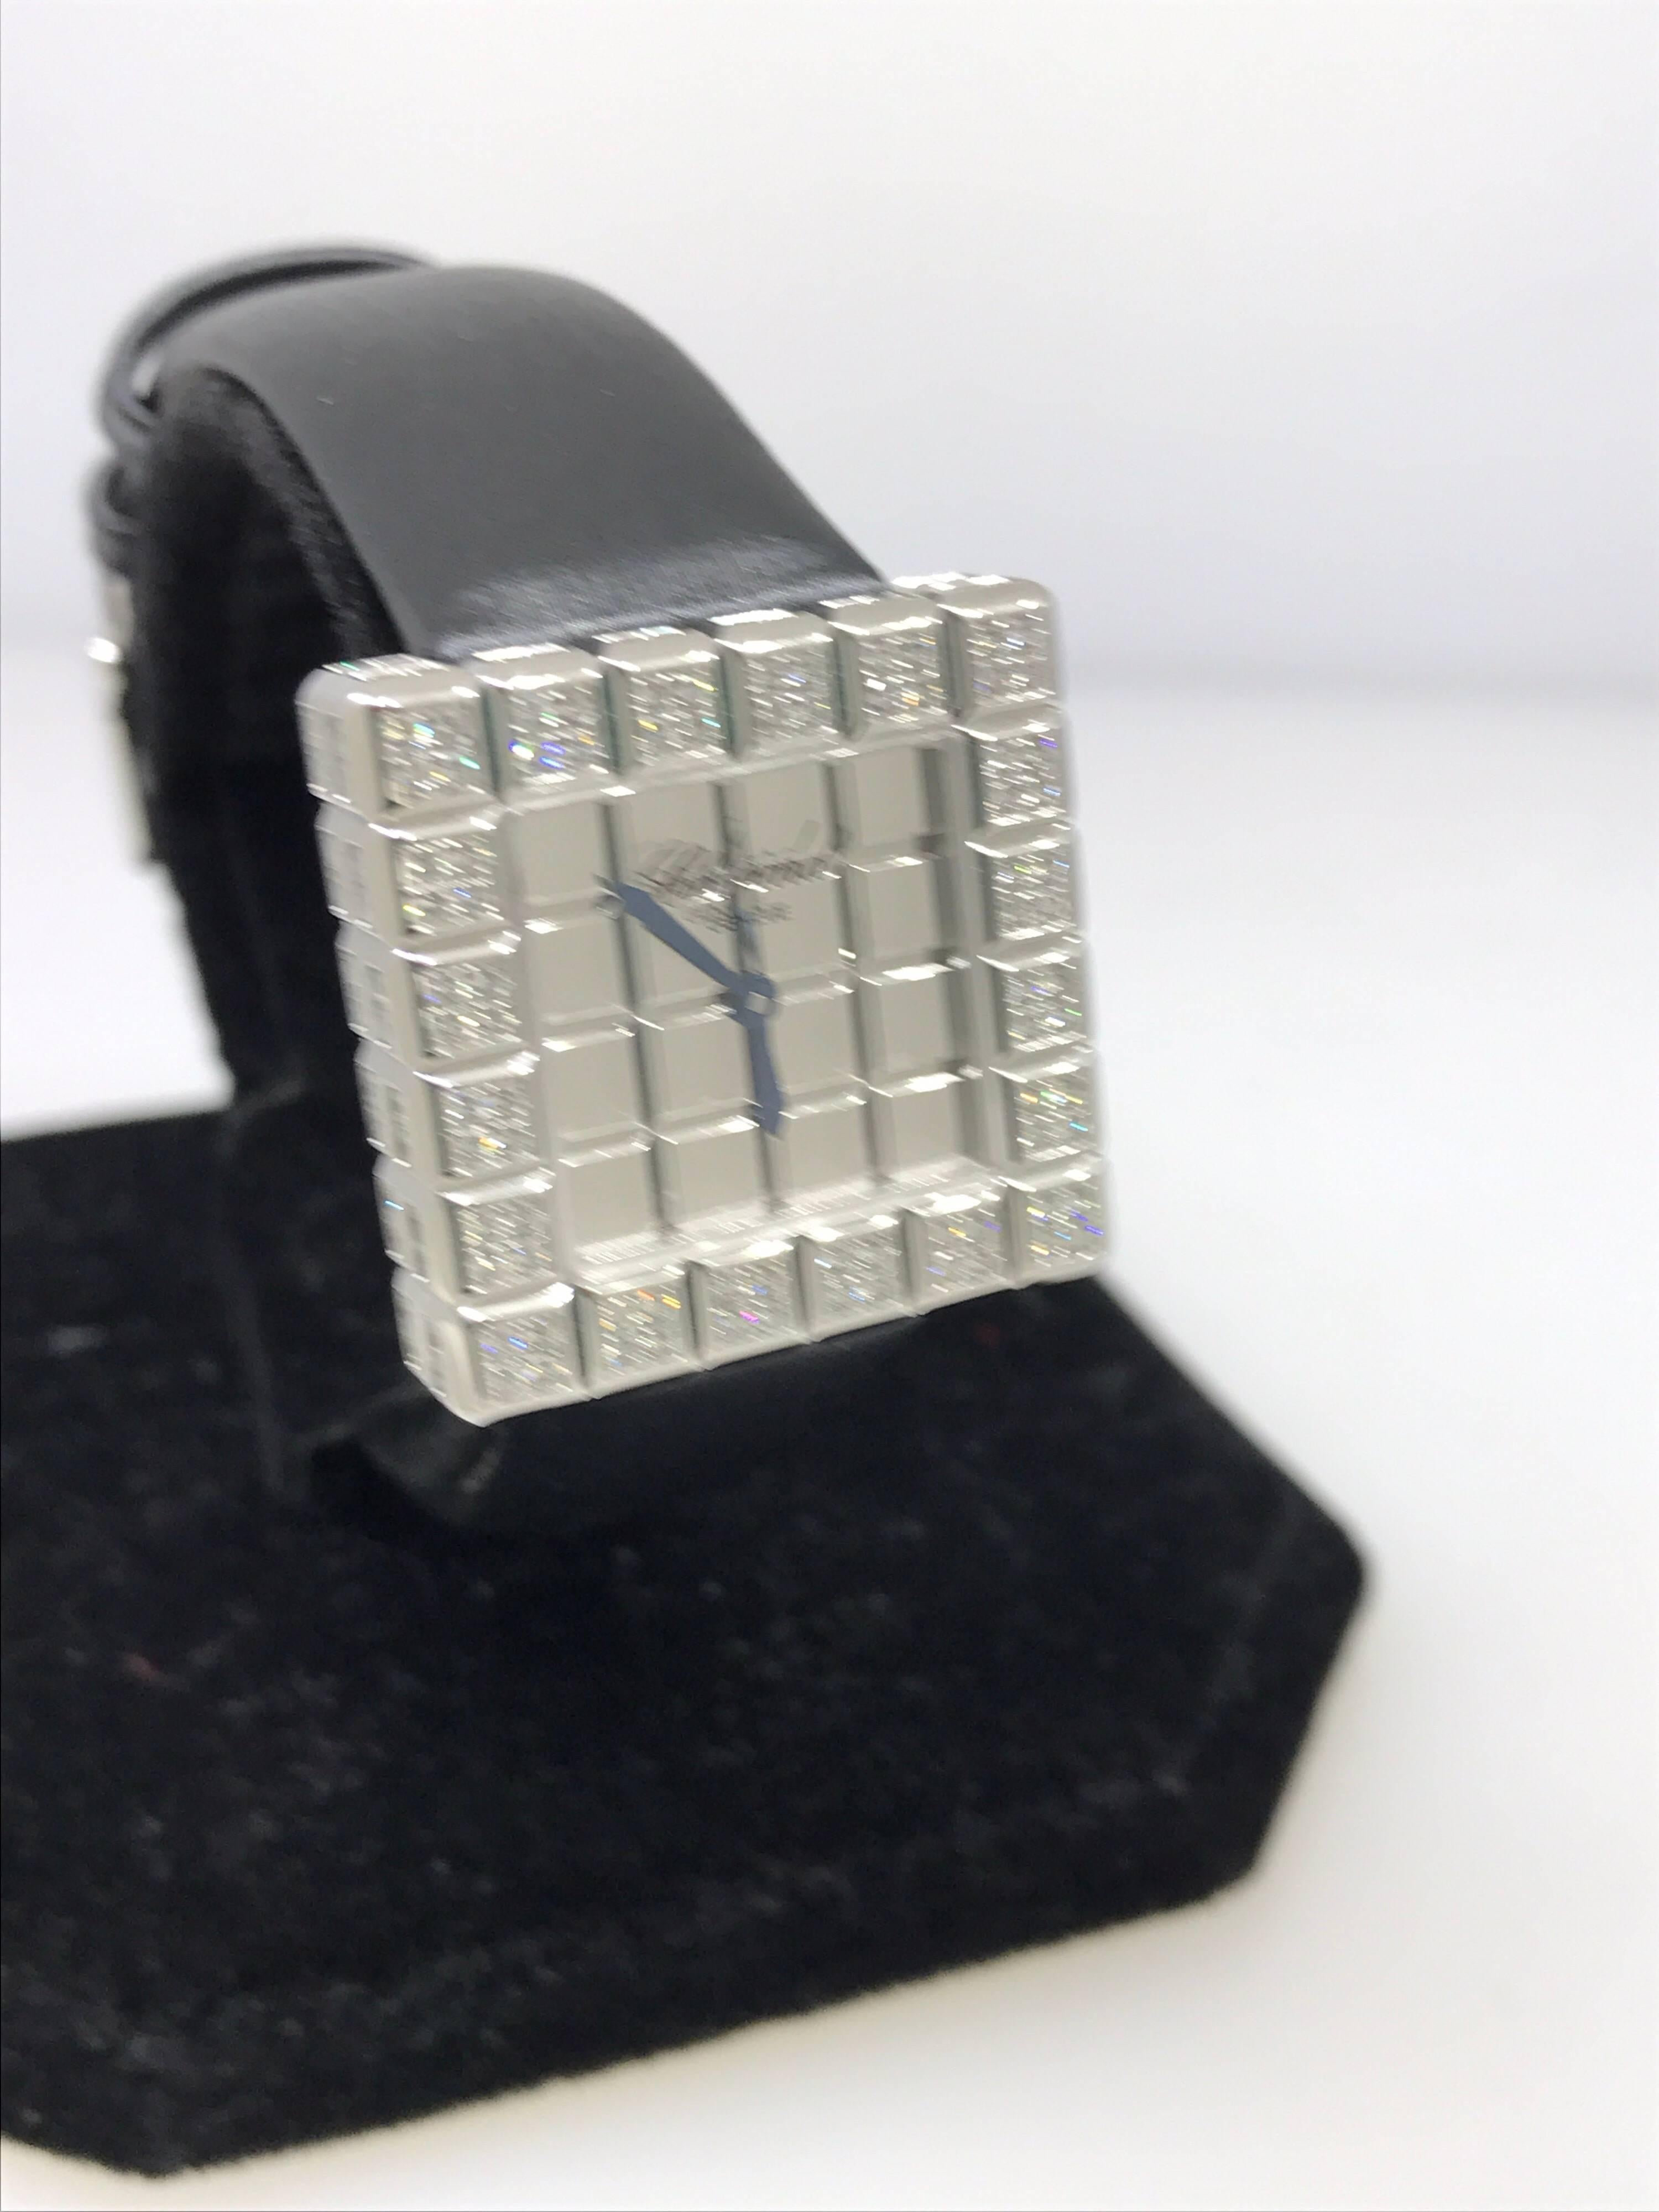 Chopard Ice Cube Lady's Watch

Model Number: 13/6815-1001

100% Authentic

Brand New

Comes with original Chopard box, certificate of authenticity and warranty, and instruction manual

18 Karat White Gold Case & Buckle

Watch Weight: 52gr

White